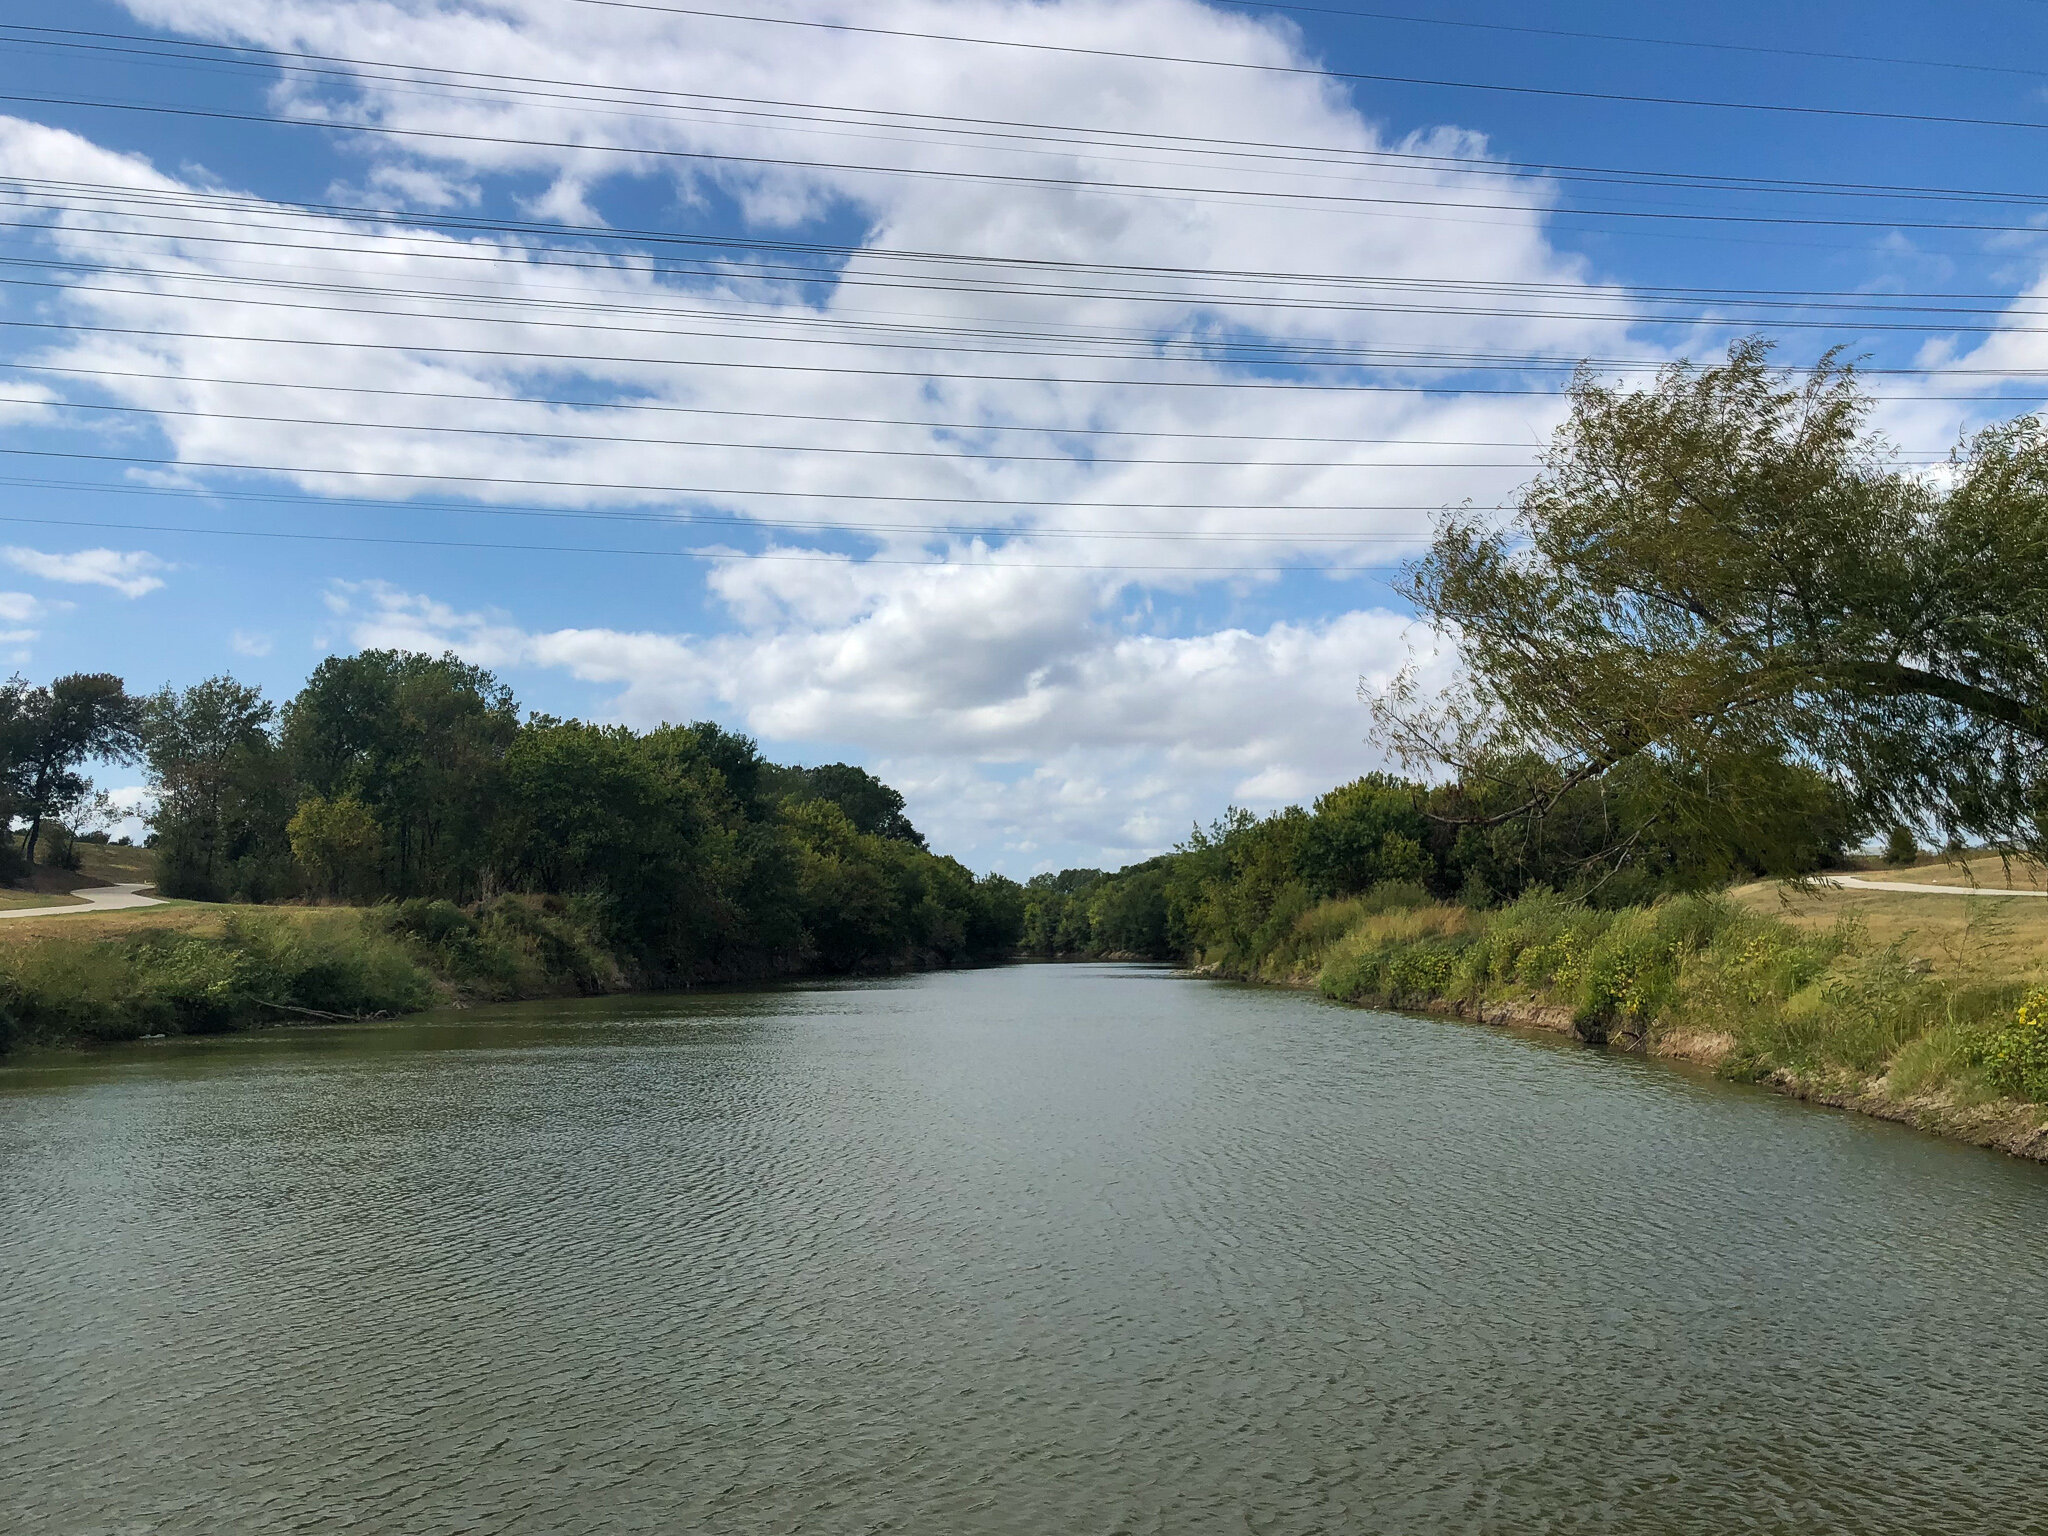  West Fork Trinity River near Downtown Fort Worth.  